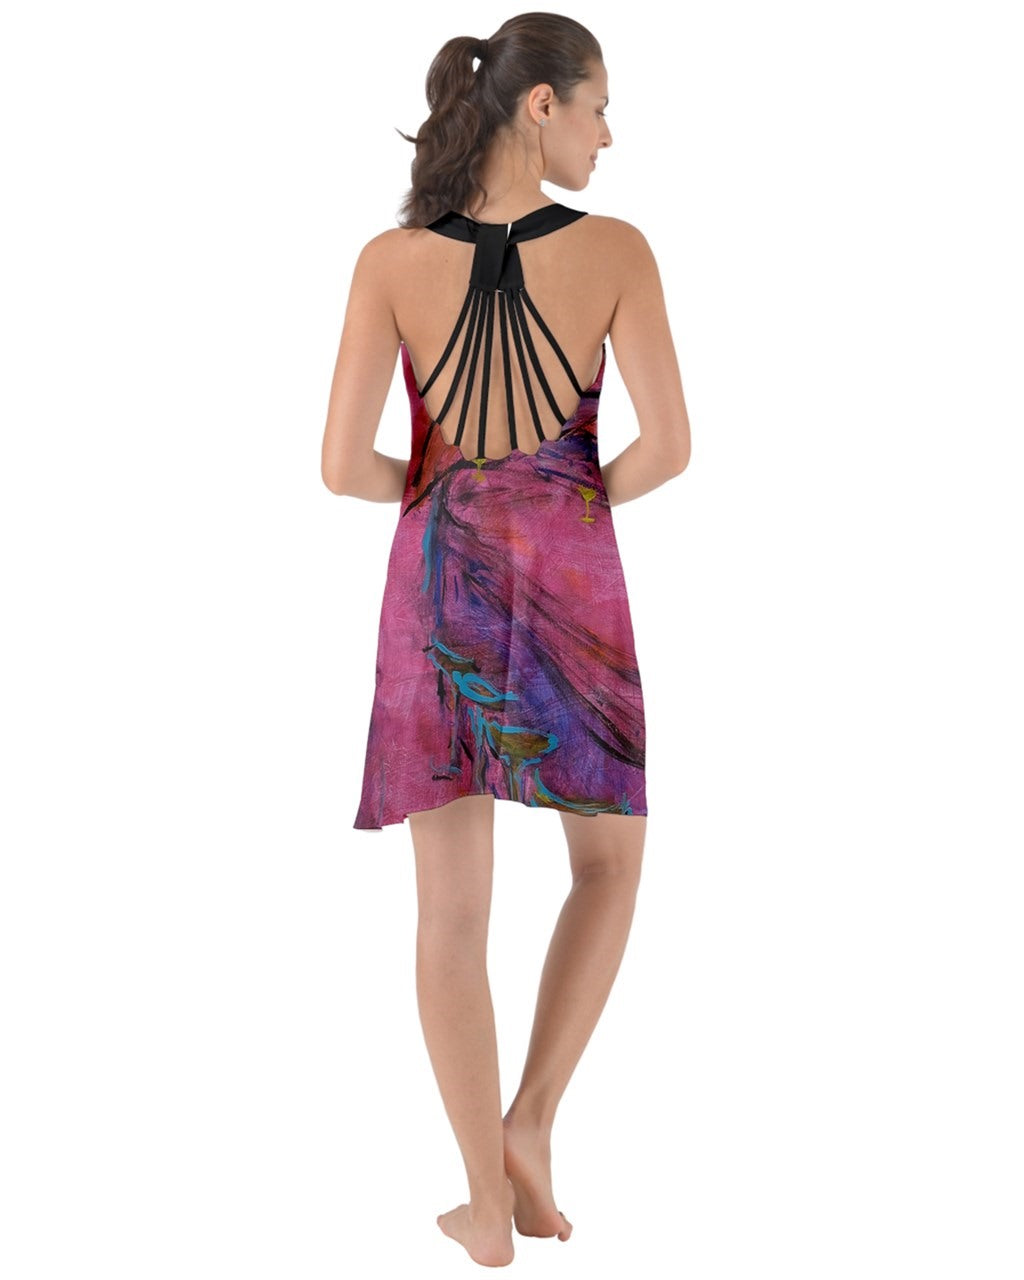 A captivating pink swirling dress featuring criss-cross back straps, adorned with original art by Leeorah. The fabric gracefully flows, accentuating movement with its seductive design .Be the star on the dance floor .Back view